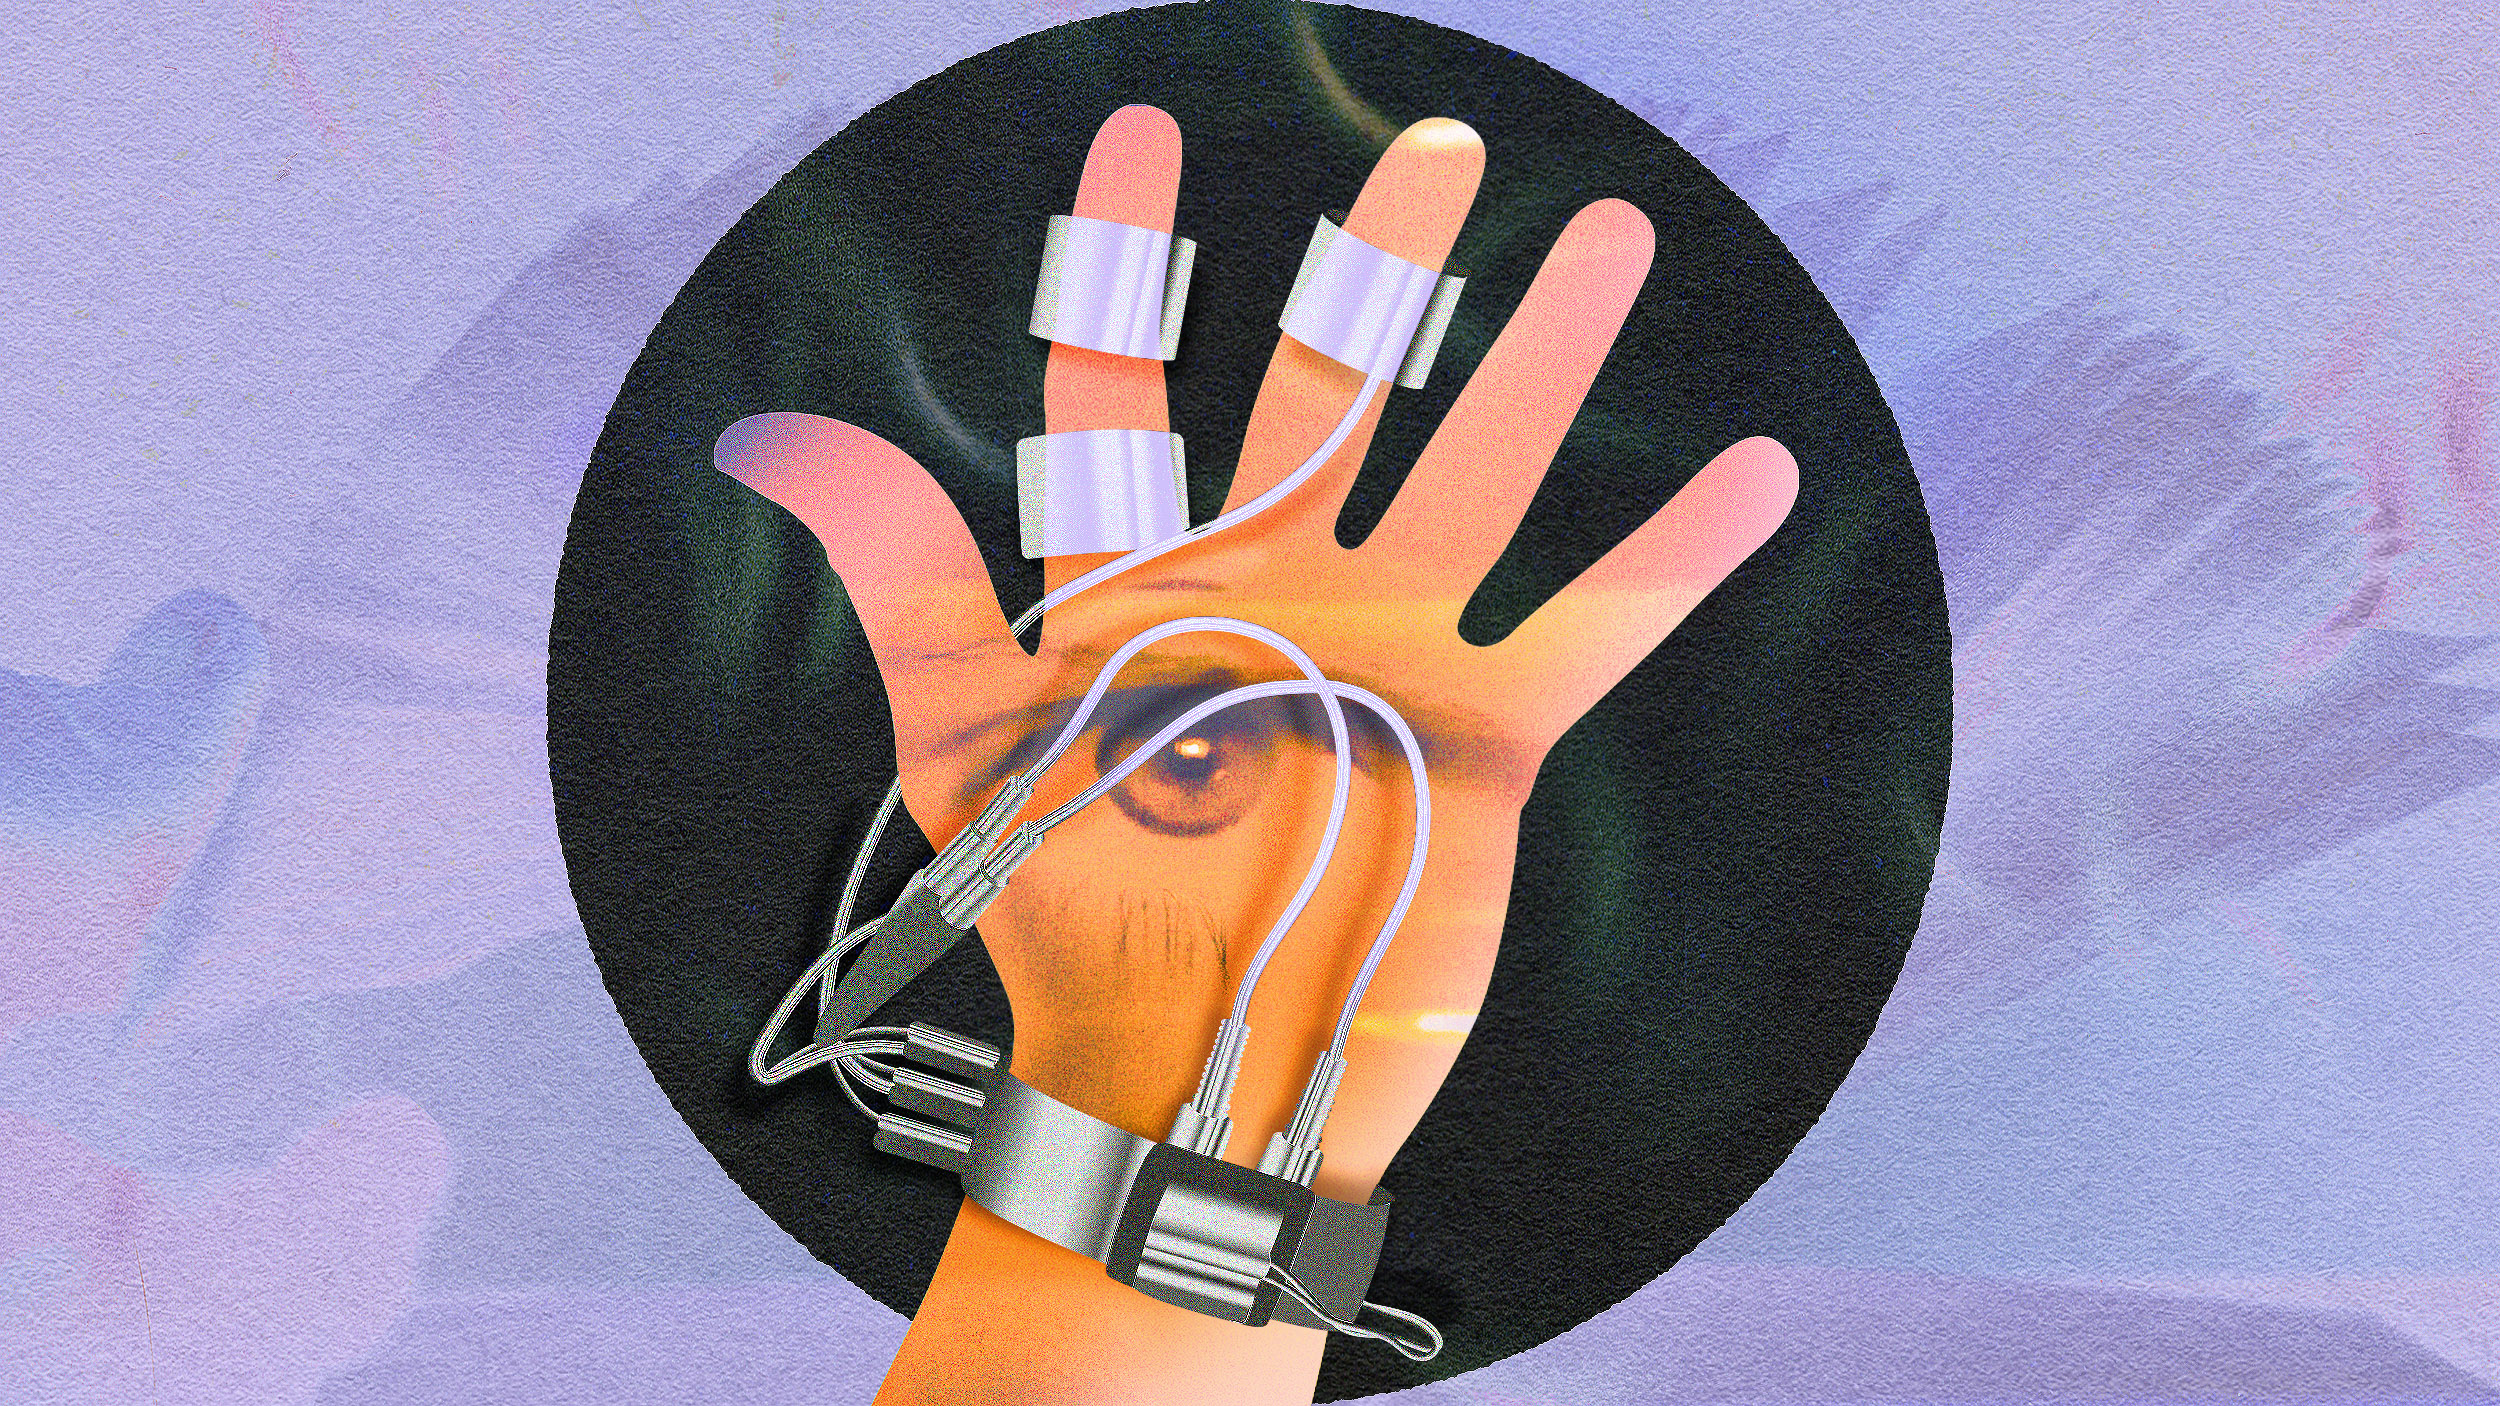 An illustration of a hand with mechanical fingers and wires, symbolizing the inception of dreams in the integration of technology with the human body.